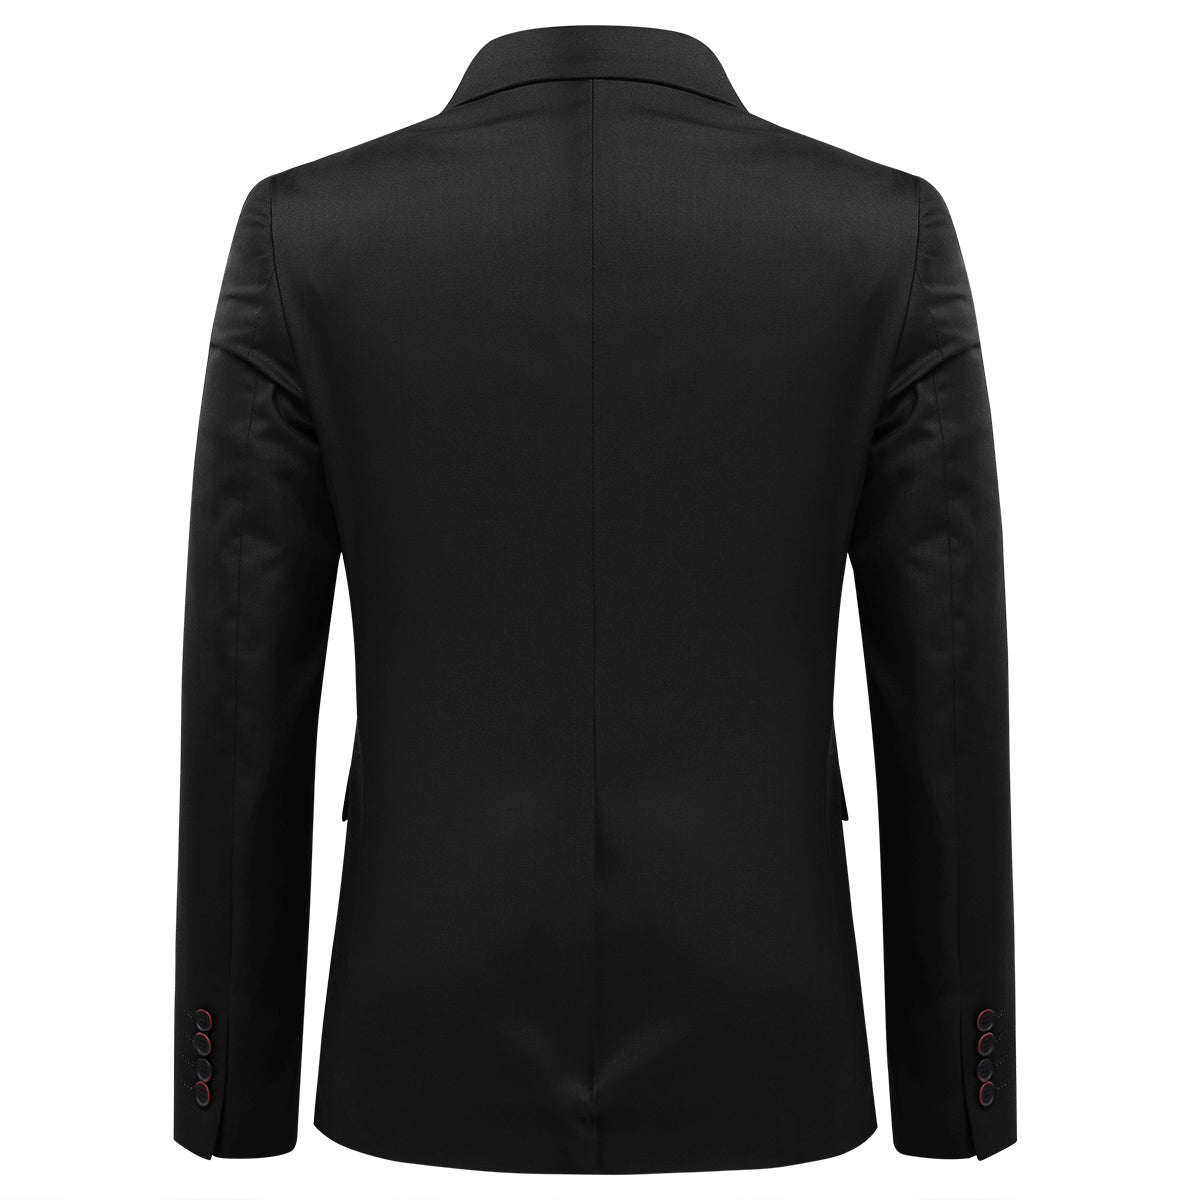 Mens Solid Color One Button Single Breasted Blazer Black